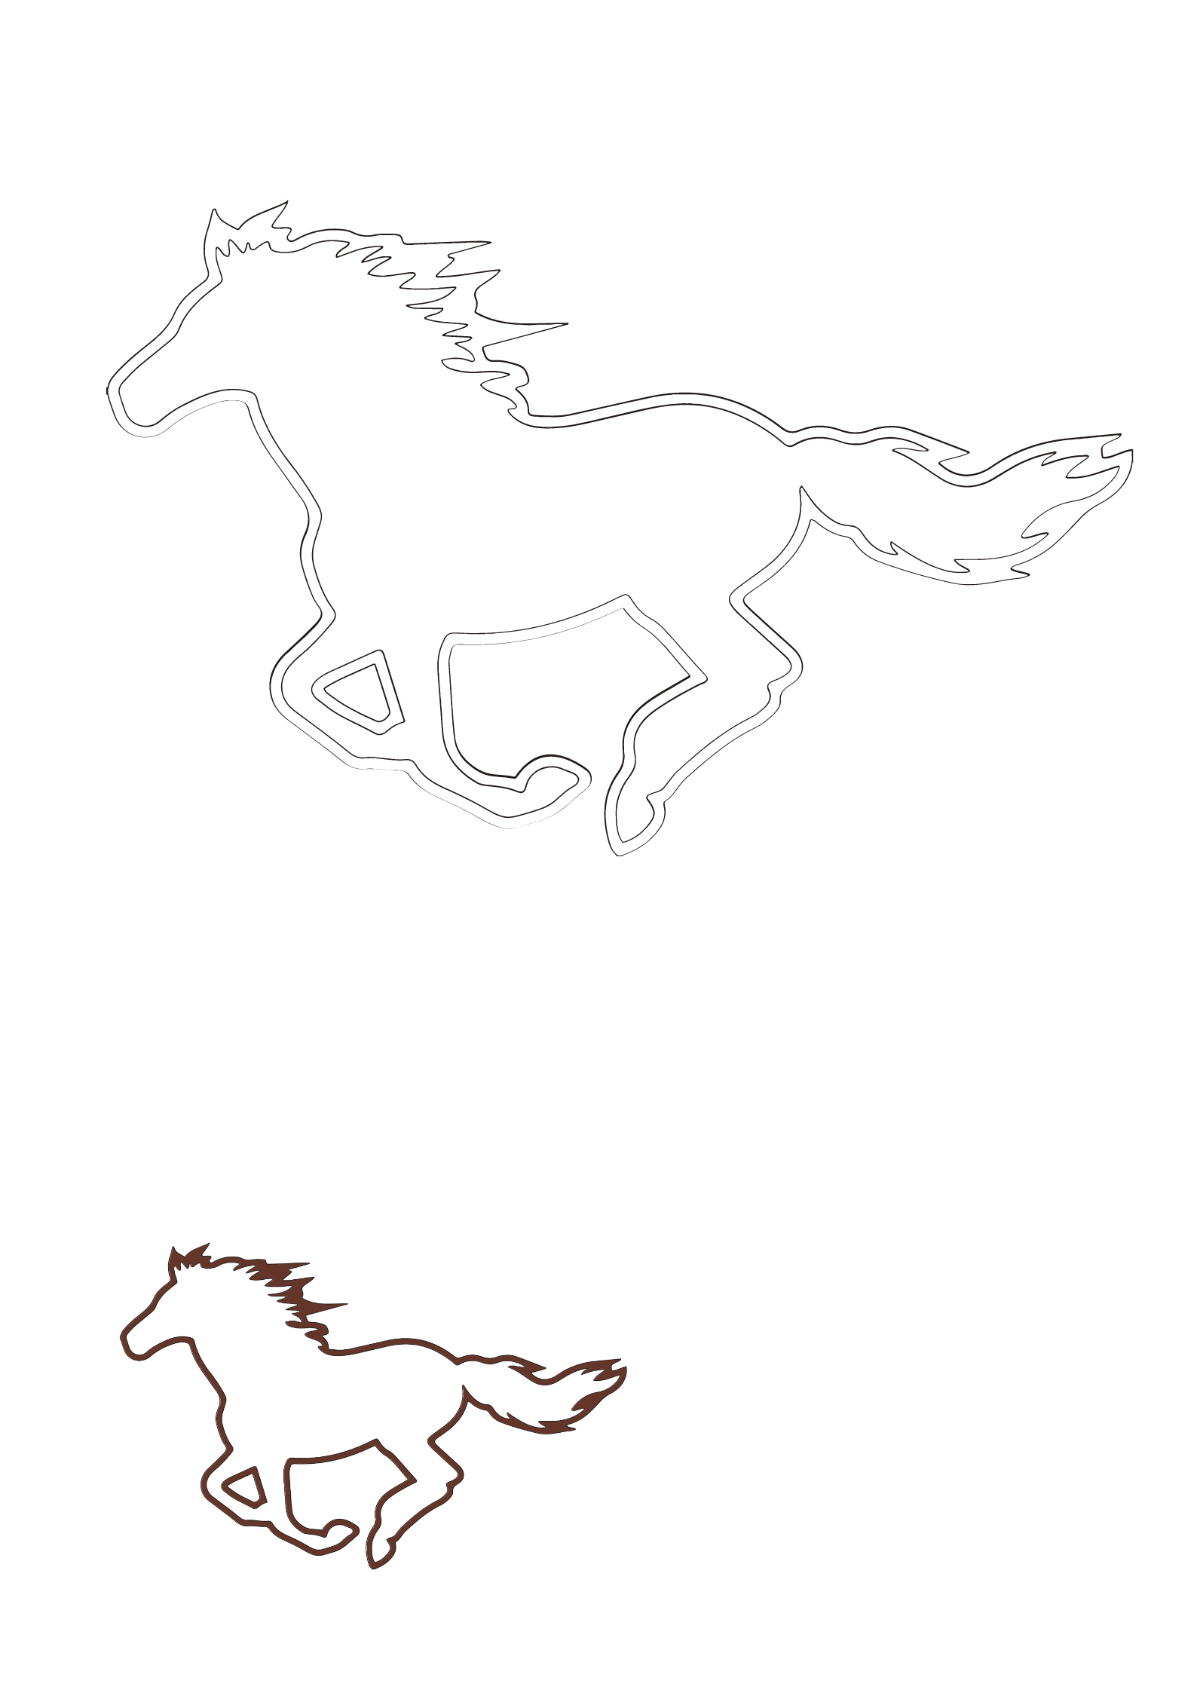 Horse Outline Coloring Page